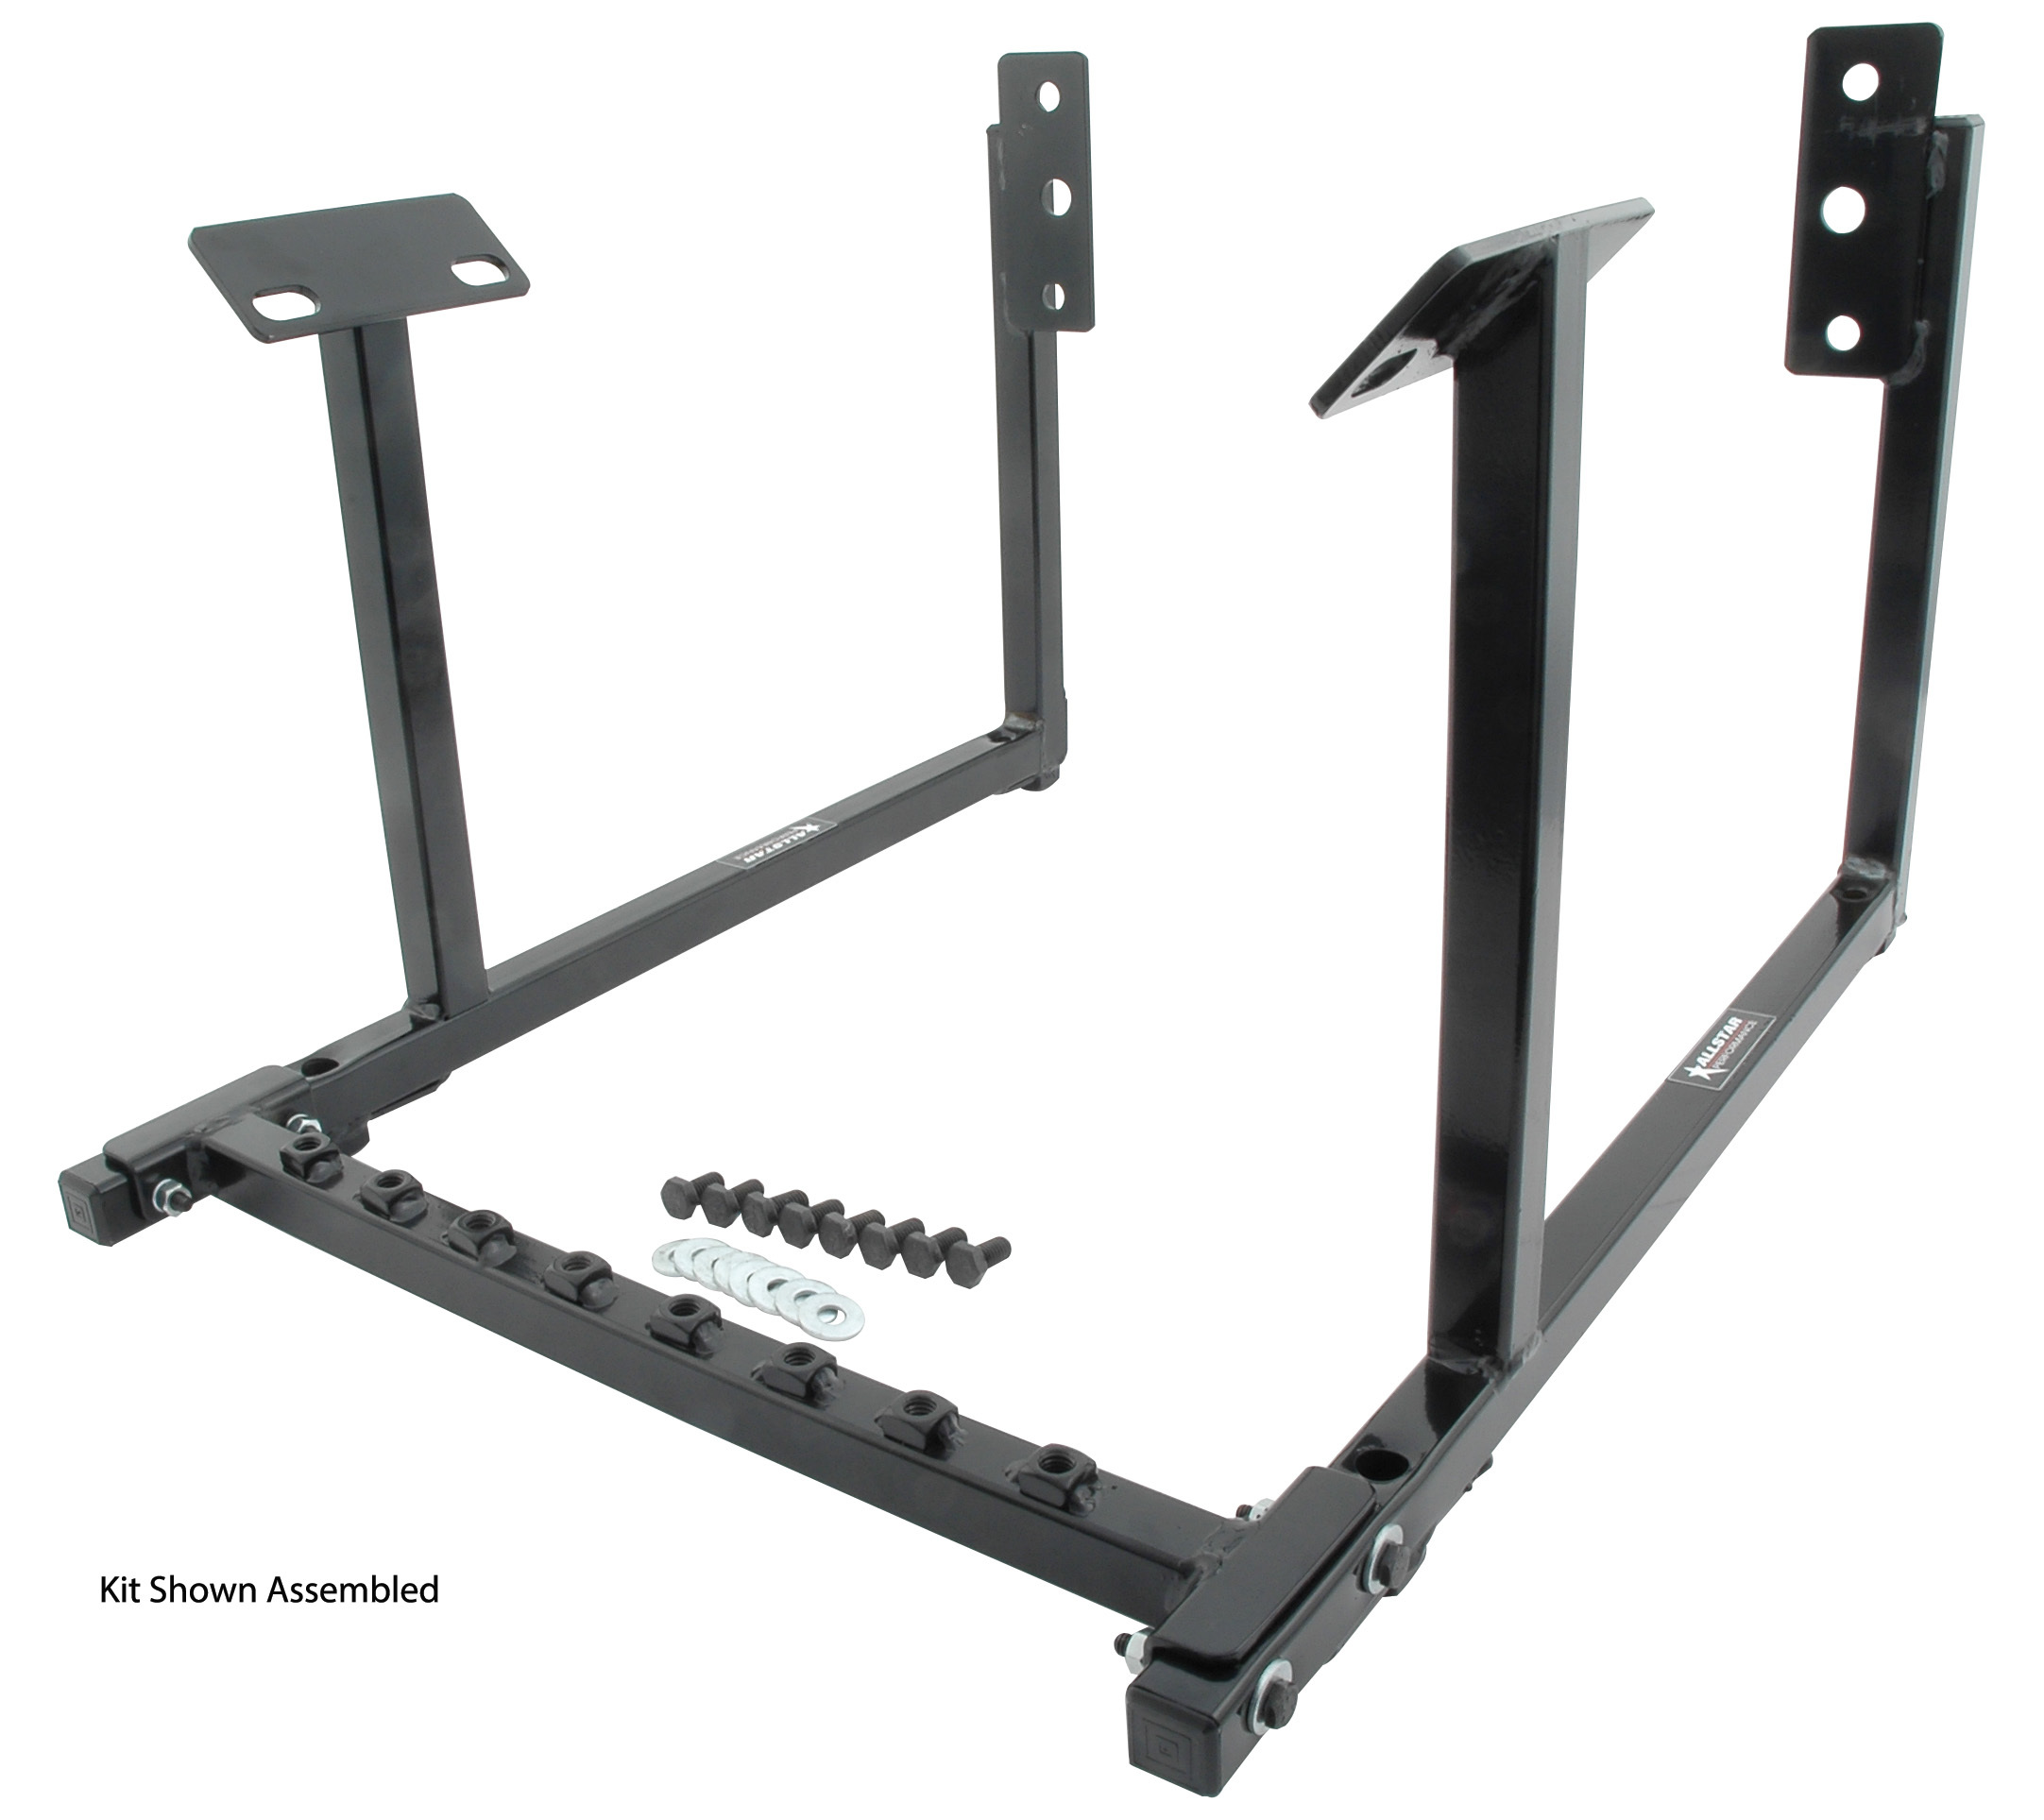 Engine Cradle - Heavy Duty - 1 in Square Tube - Hardware Included - Steel - Black Powder Coat - Big Block Chevy / Small Block Chevy - Each